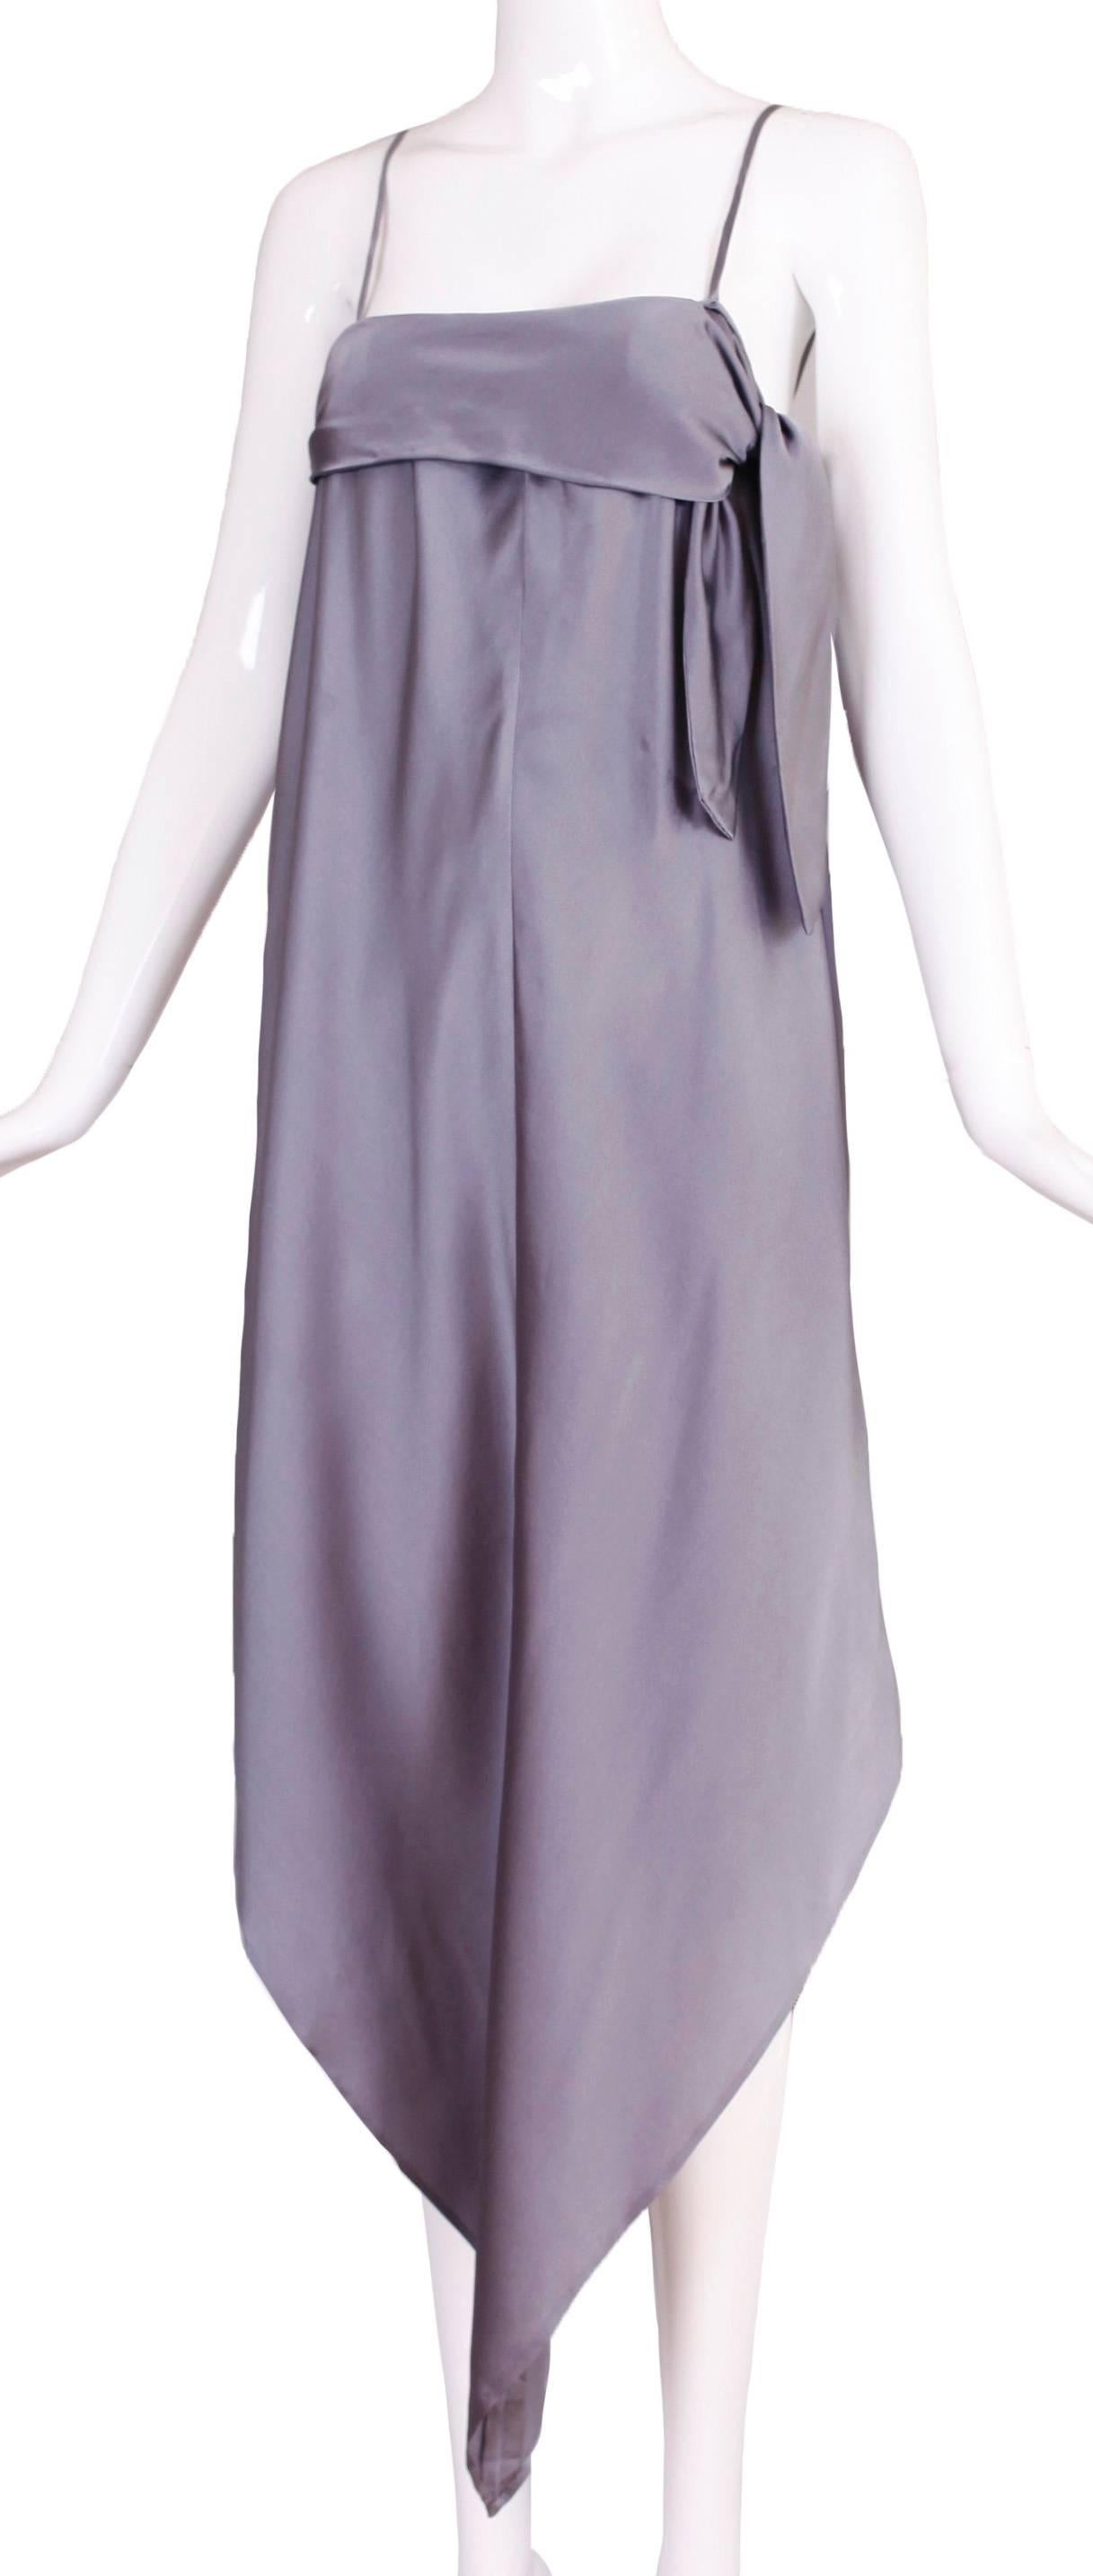 A circa 1974 Pauline Trigere steel grey silk charmeuse 2-piece gown comprised of a strapless gown with handkerchief hem and side tie, and a matching grey silk charmeuse underskirt. In excellent condition. No size tag so please consult